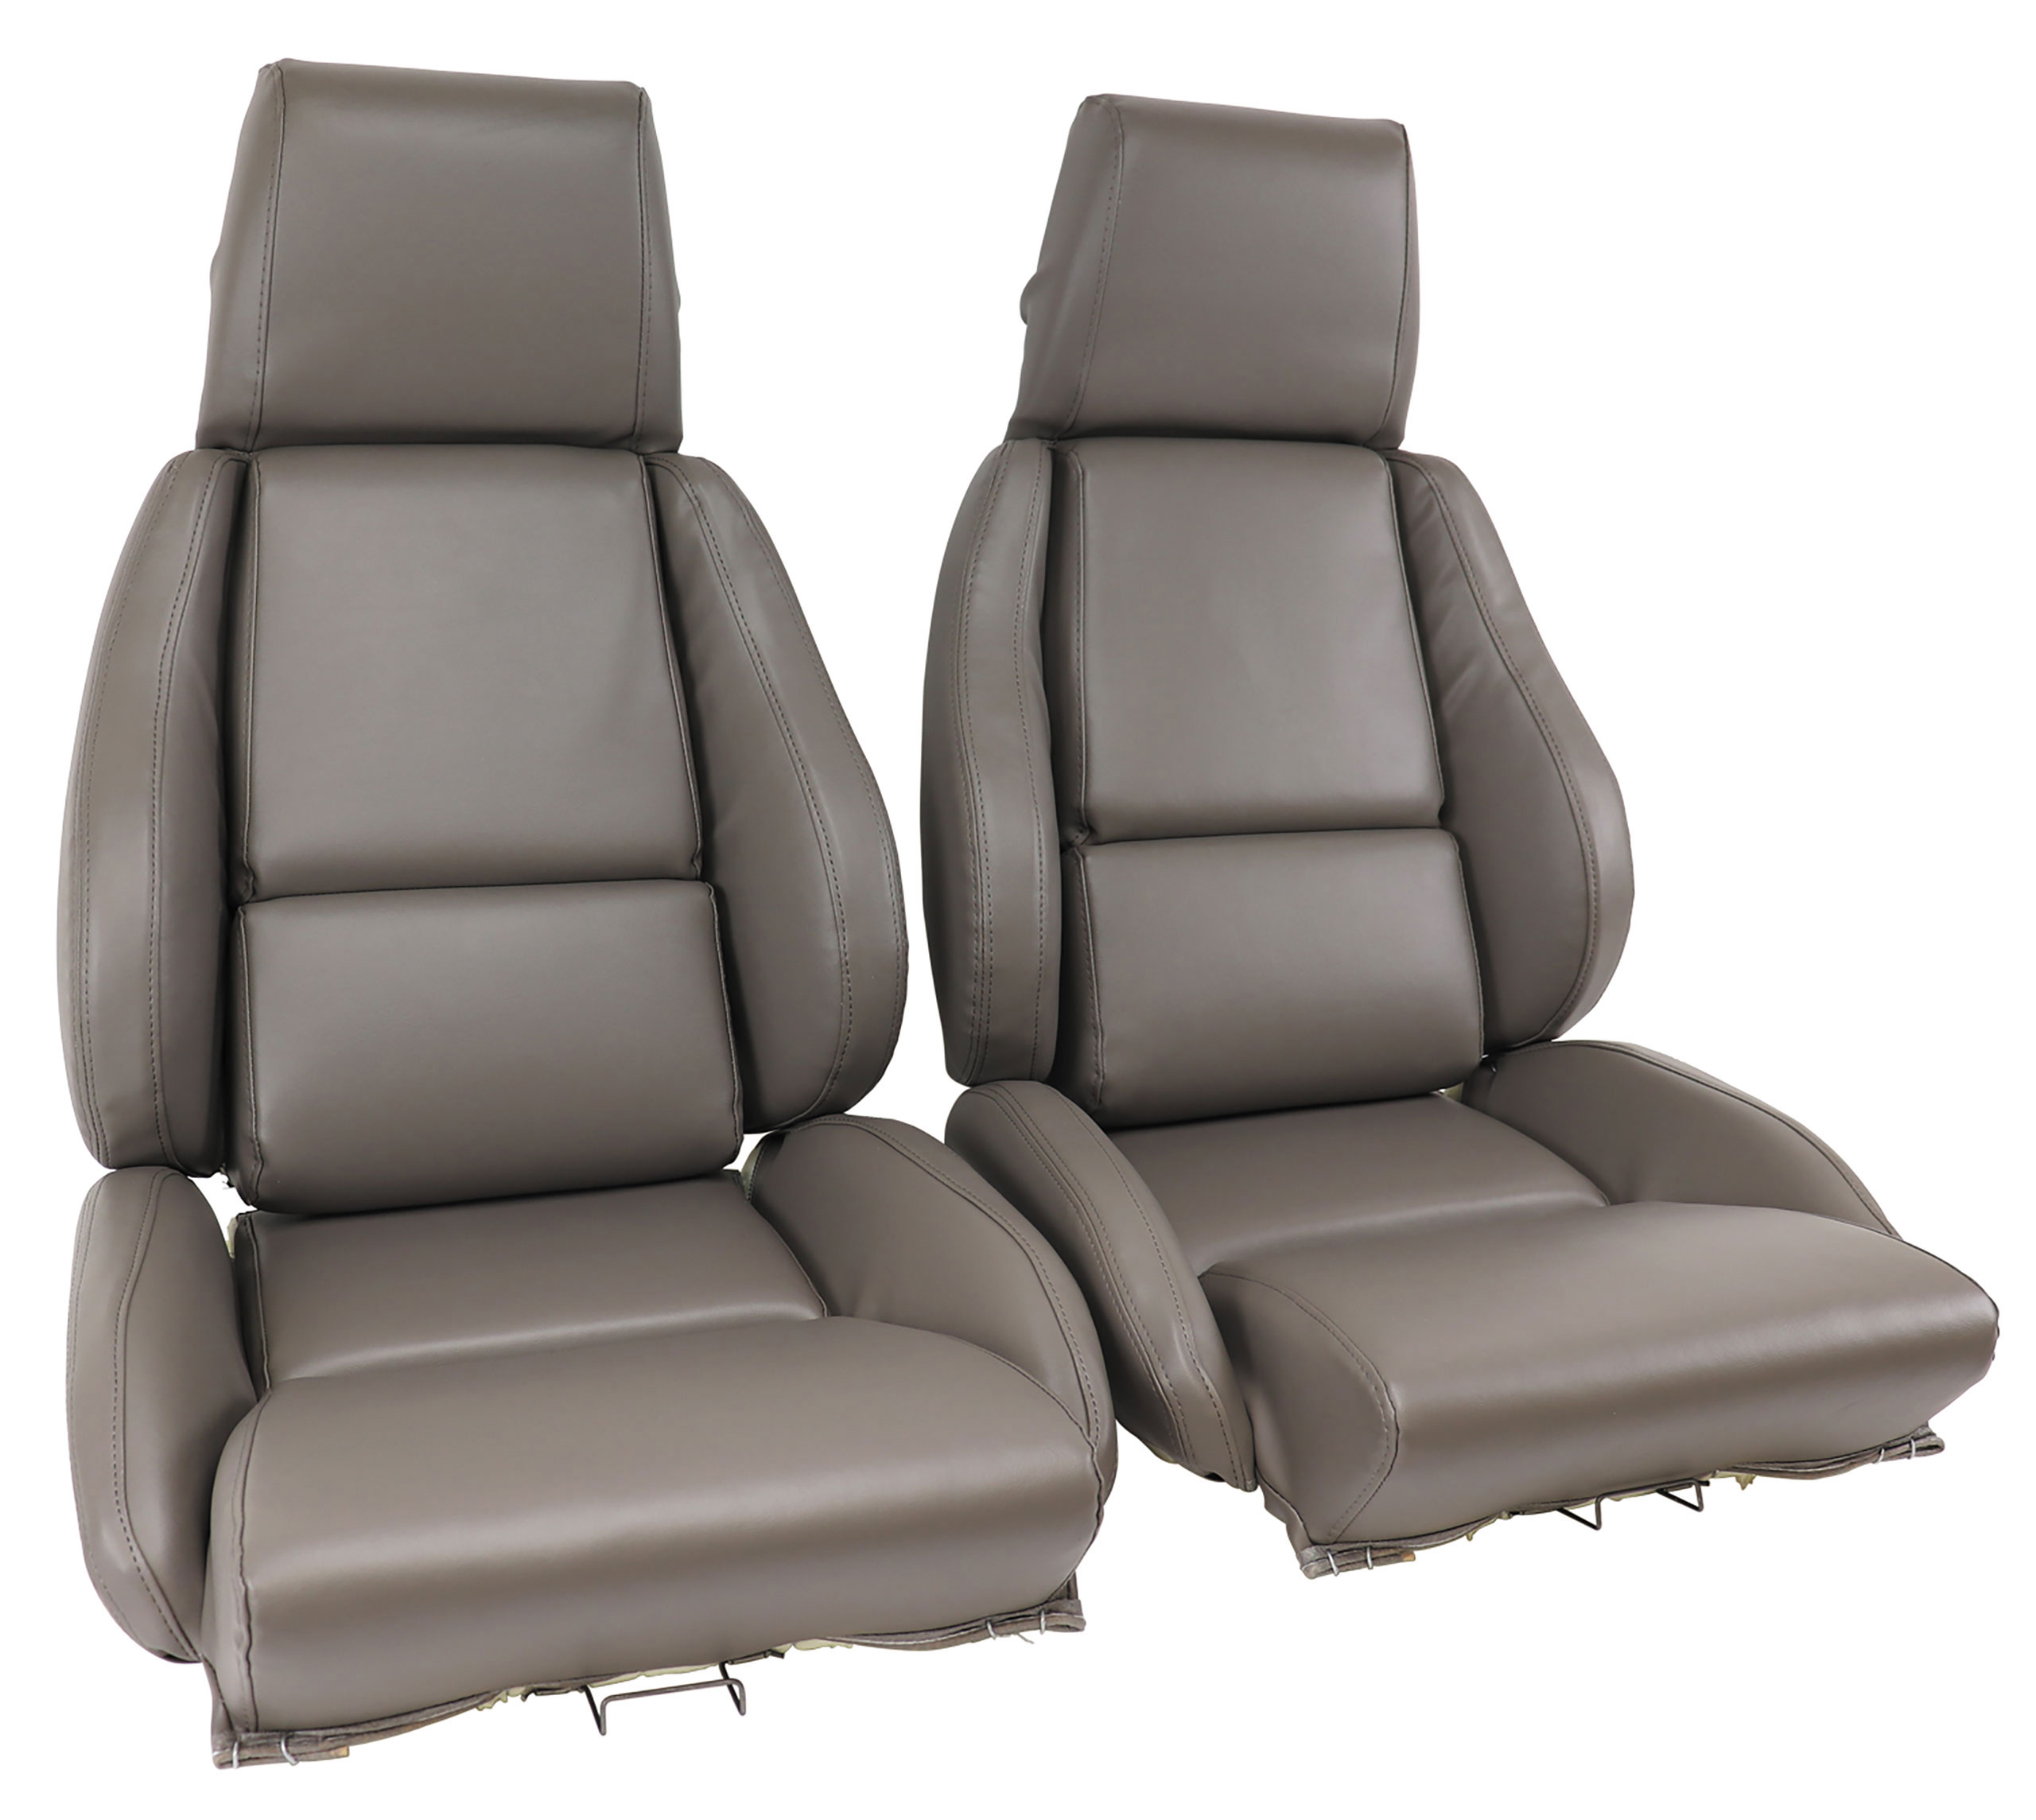 88 Corvette C4 OE Style Leather-Like Standard Seat Covers W/O Perforated Inserts Gray CA-468779 